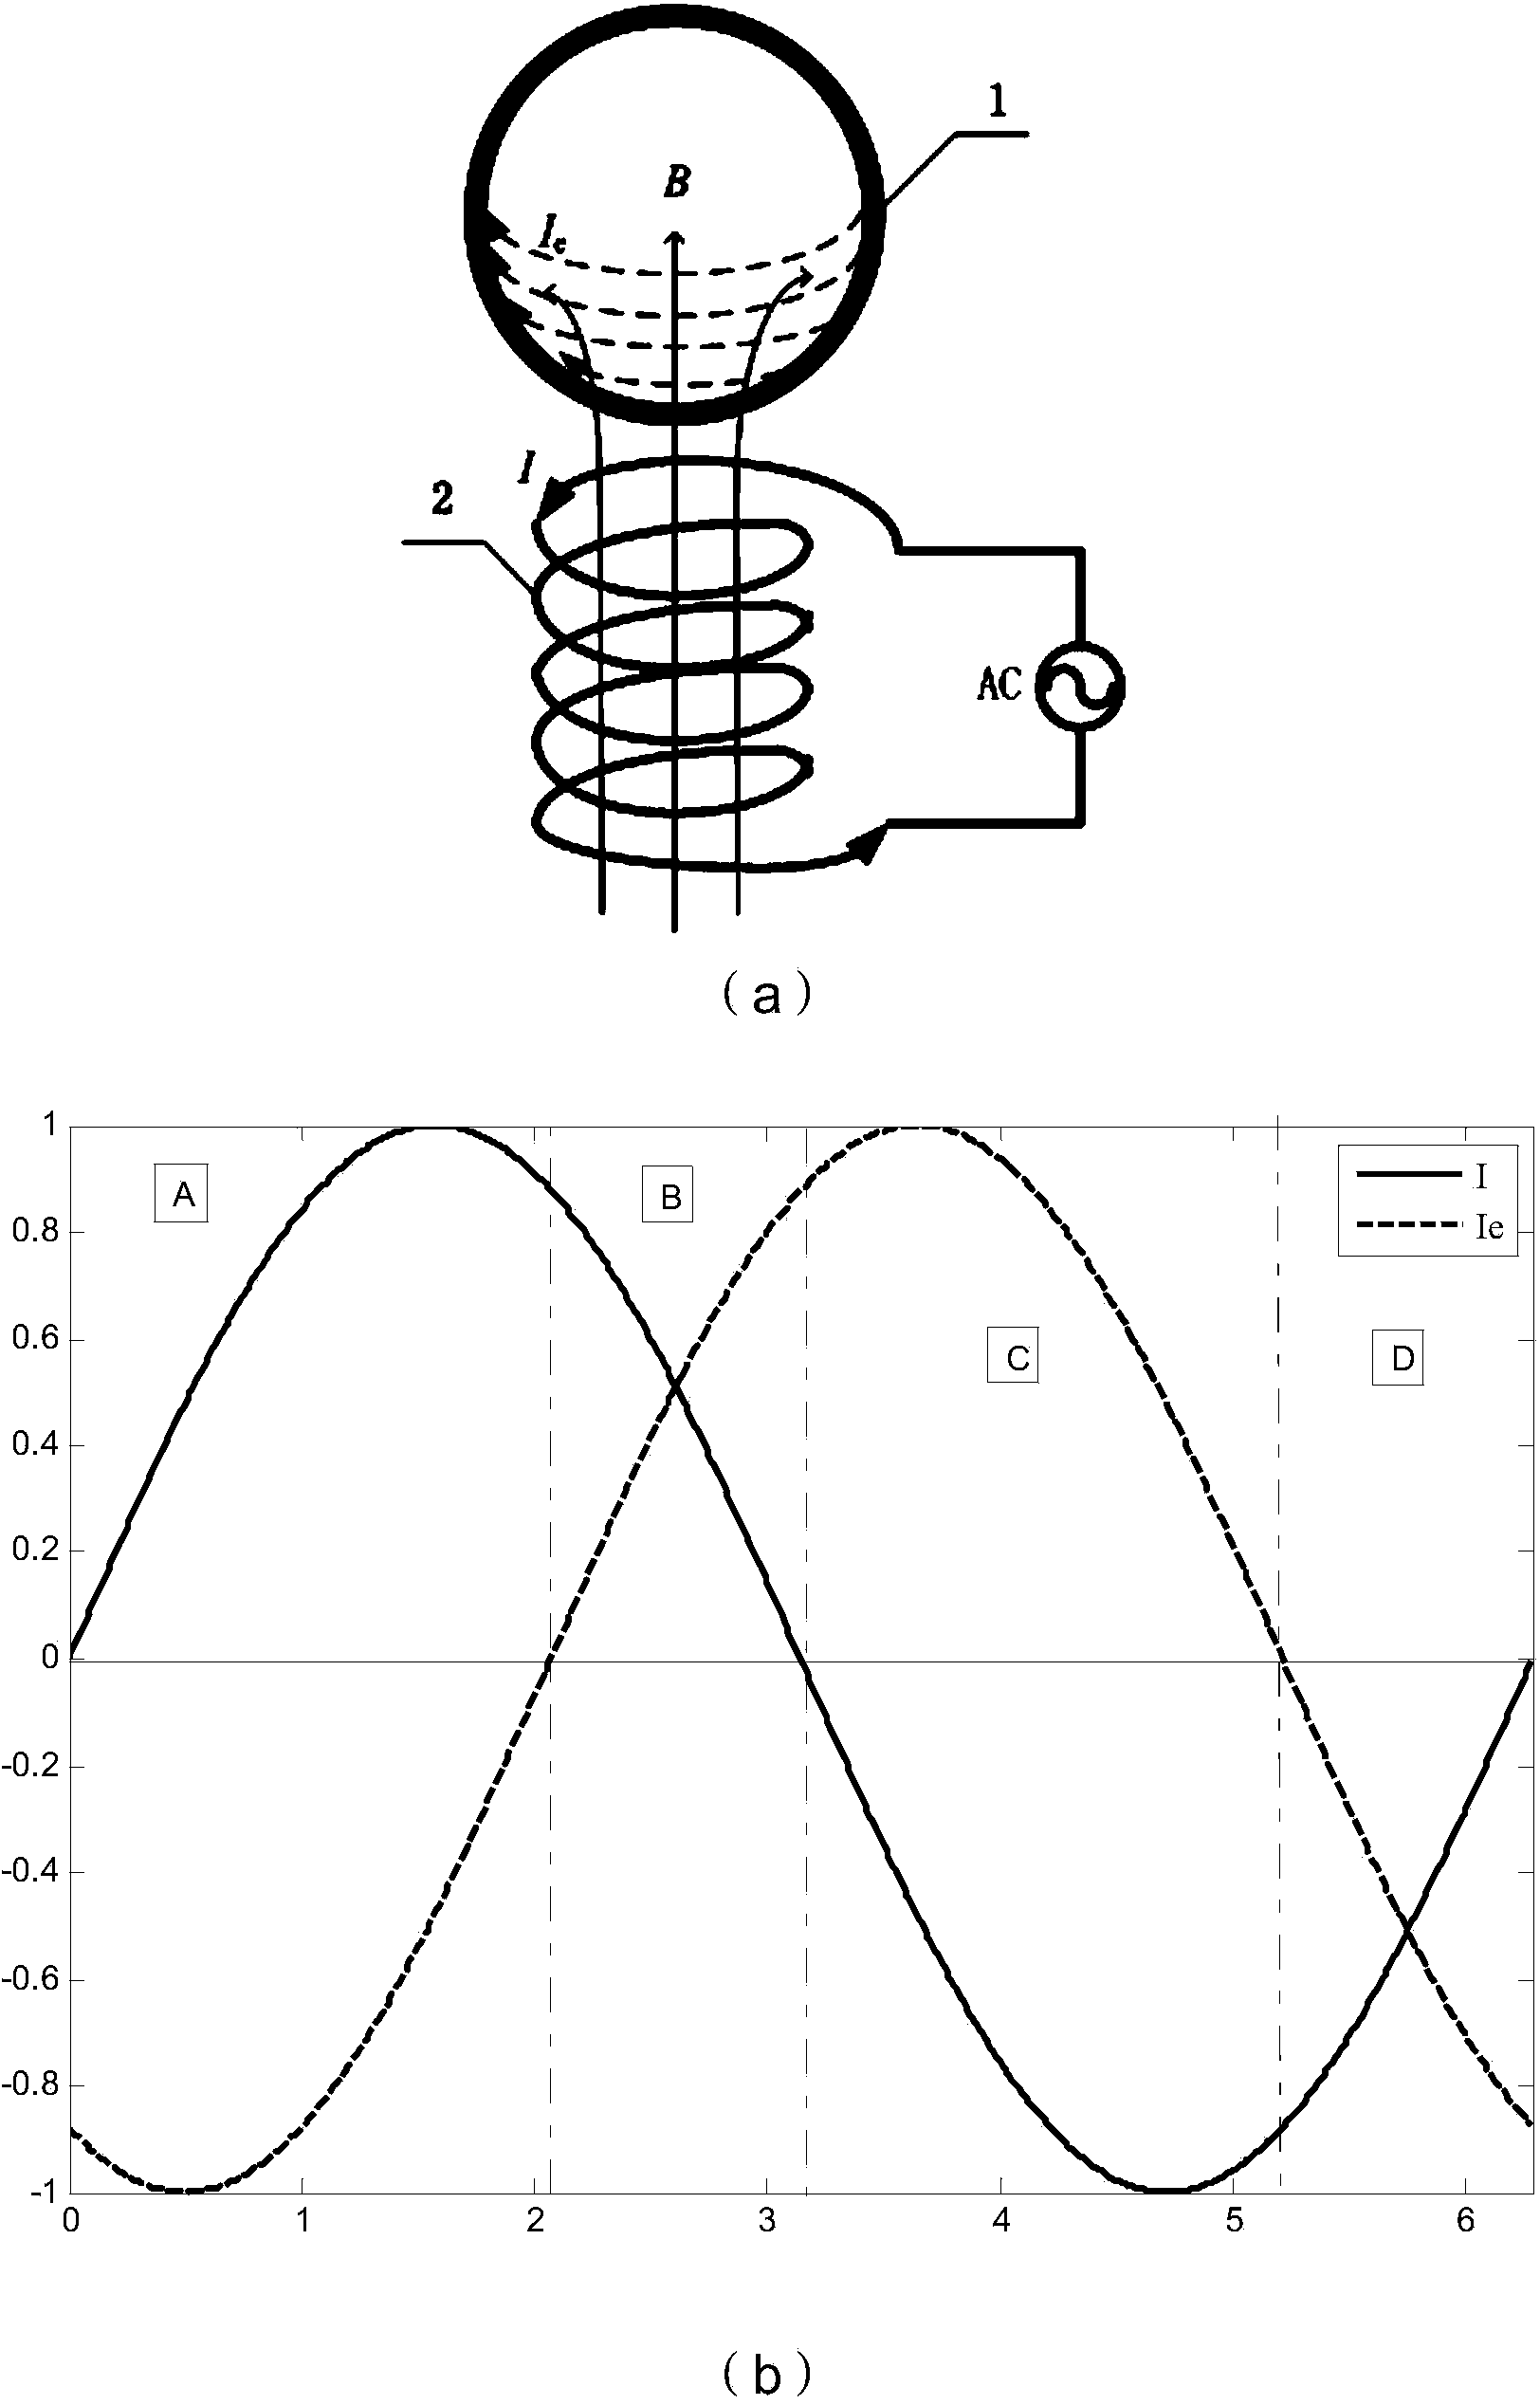 Inductive counteractive momentum sphere system